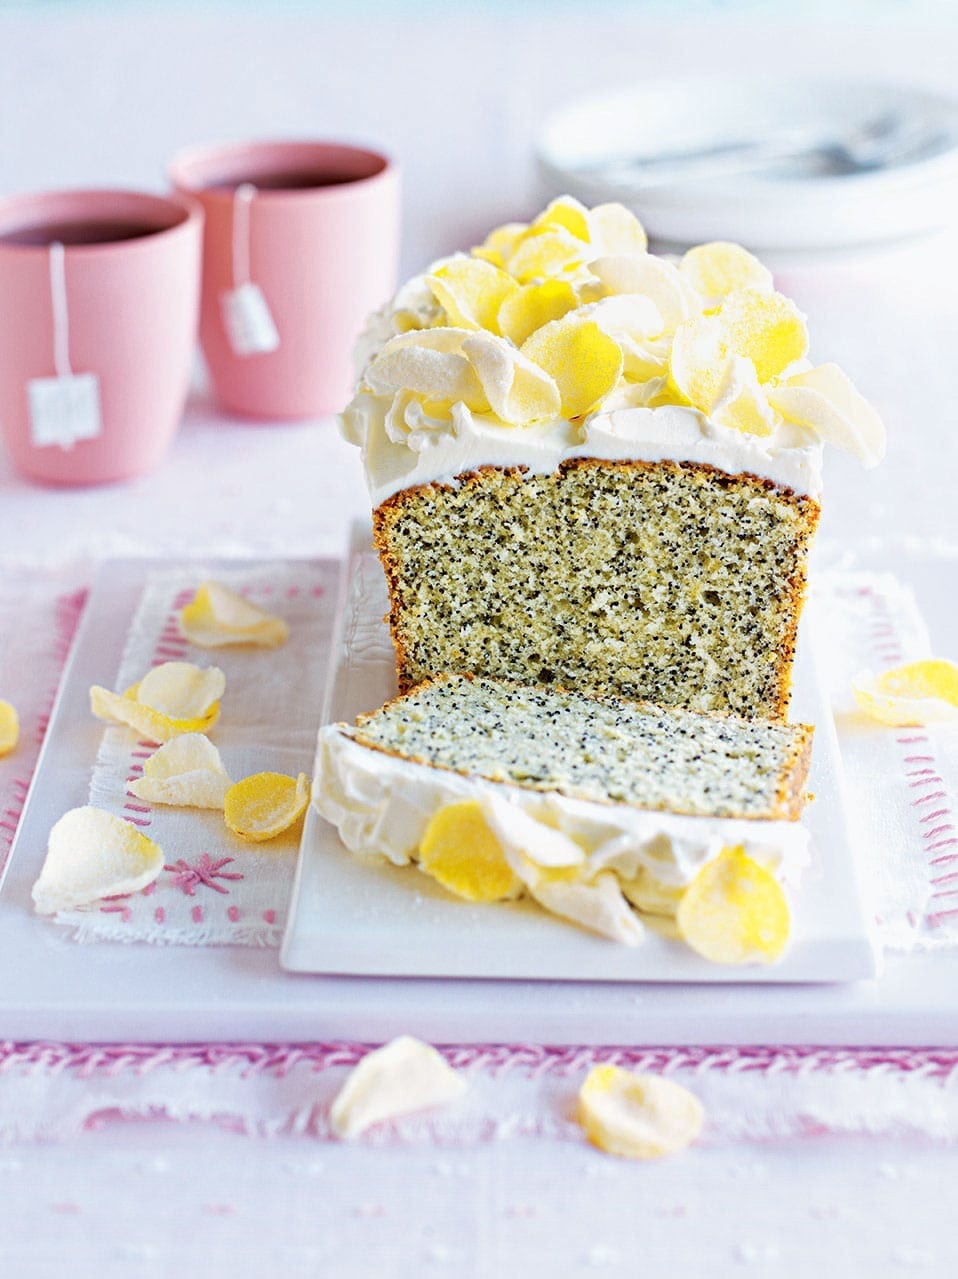 Lemon and poppy seed loaf cake with cream cheese frosting recipe ...